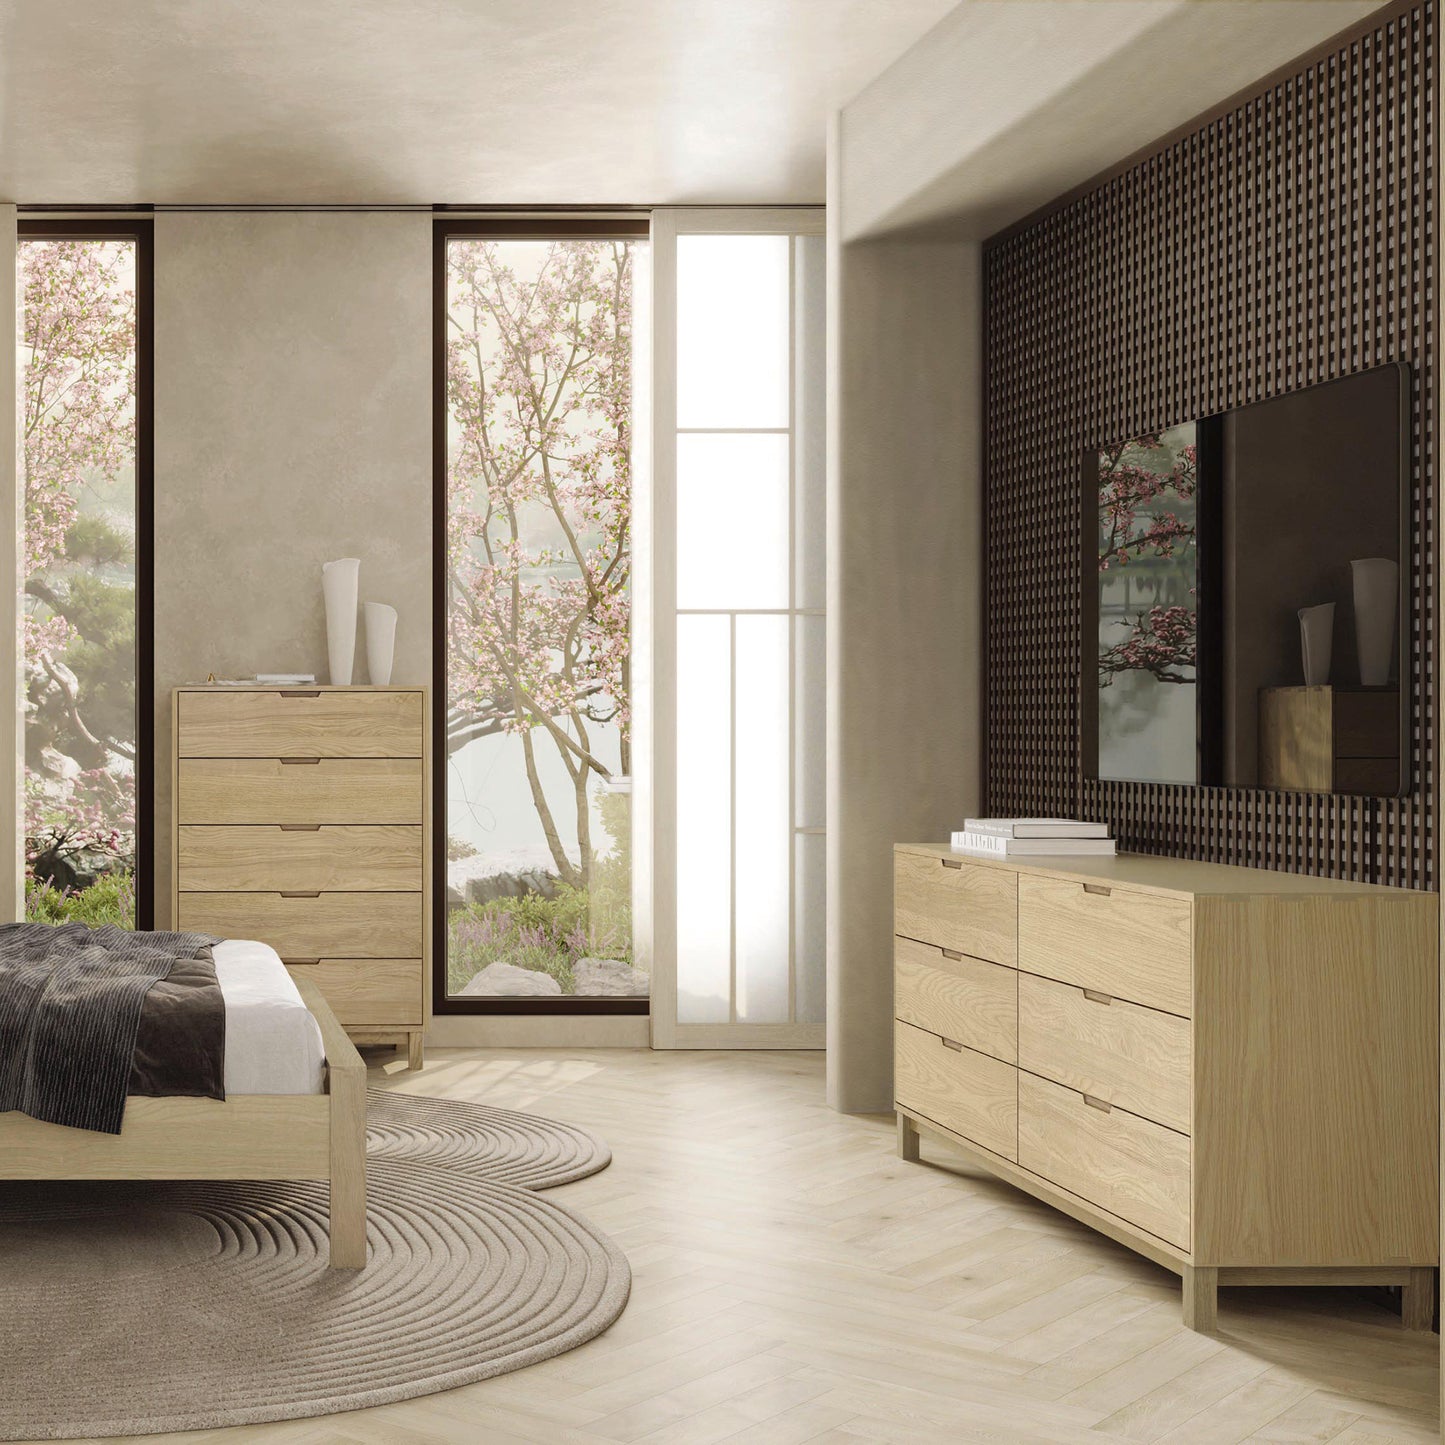 A modern bedroom with a solid oak hardwood Copeland Furniture Oslo 6-Drawer Dresser, large windows showing a blooming tree outside, and a circular rug on the floor.